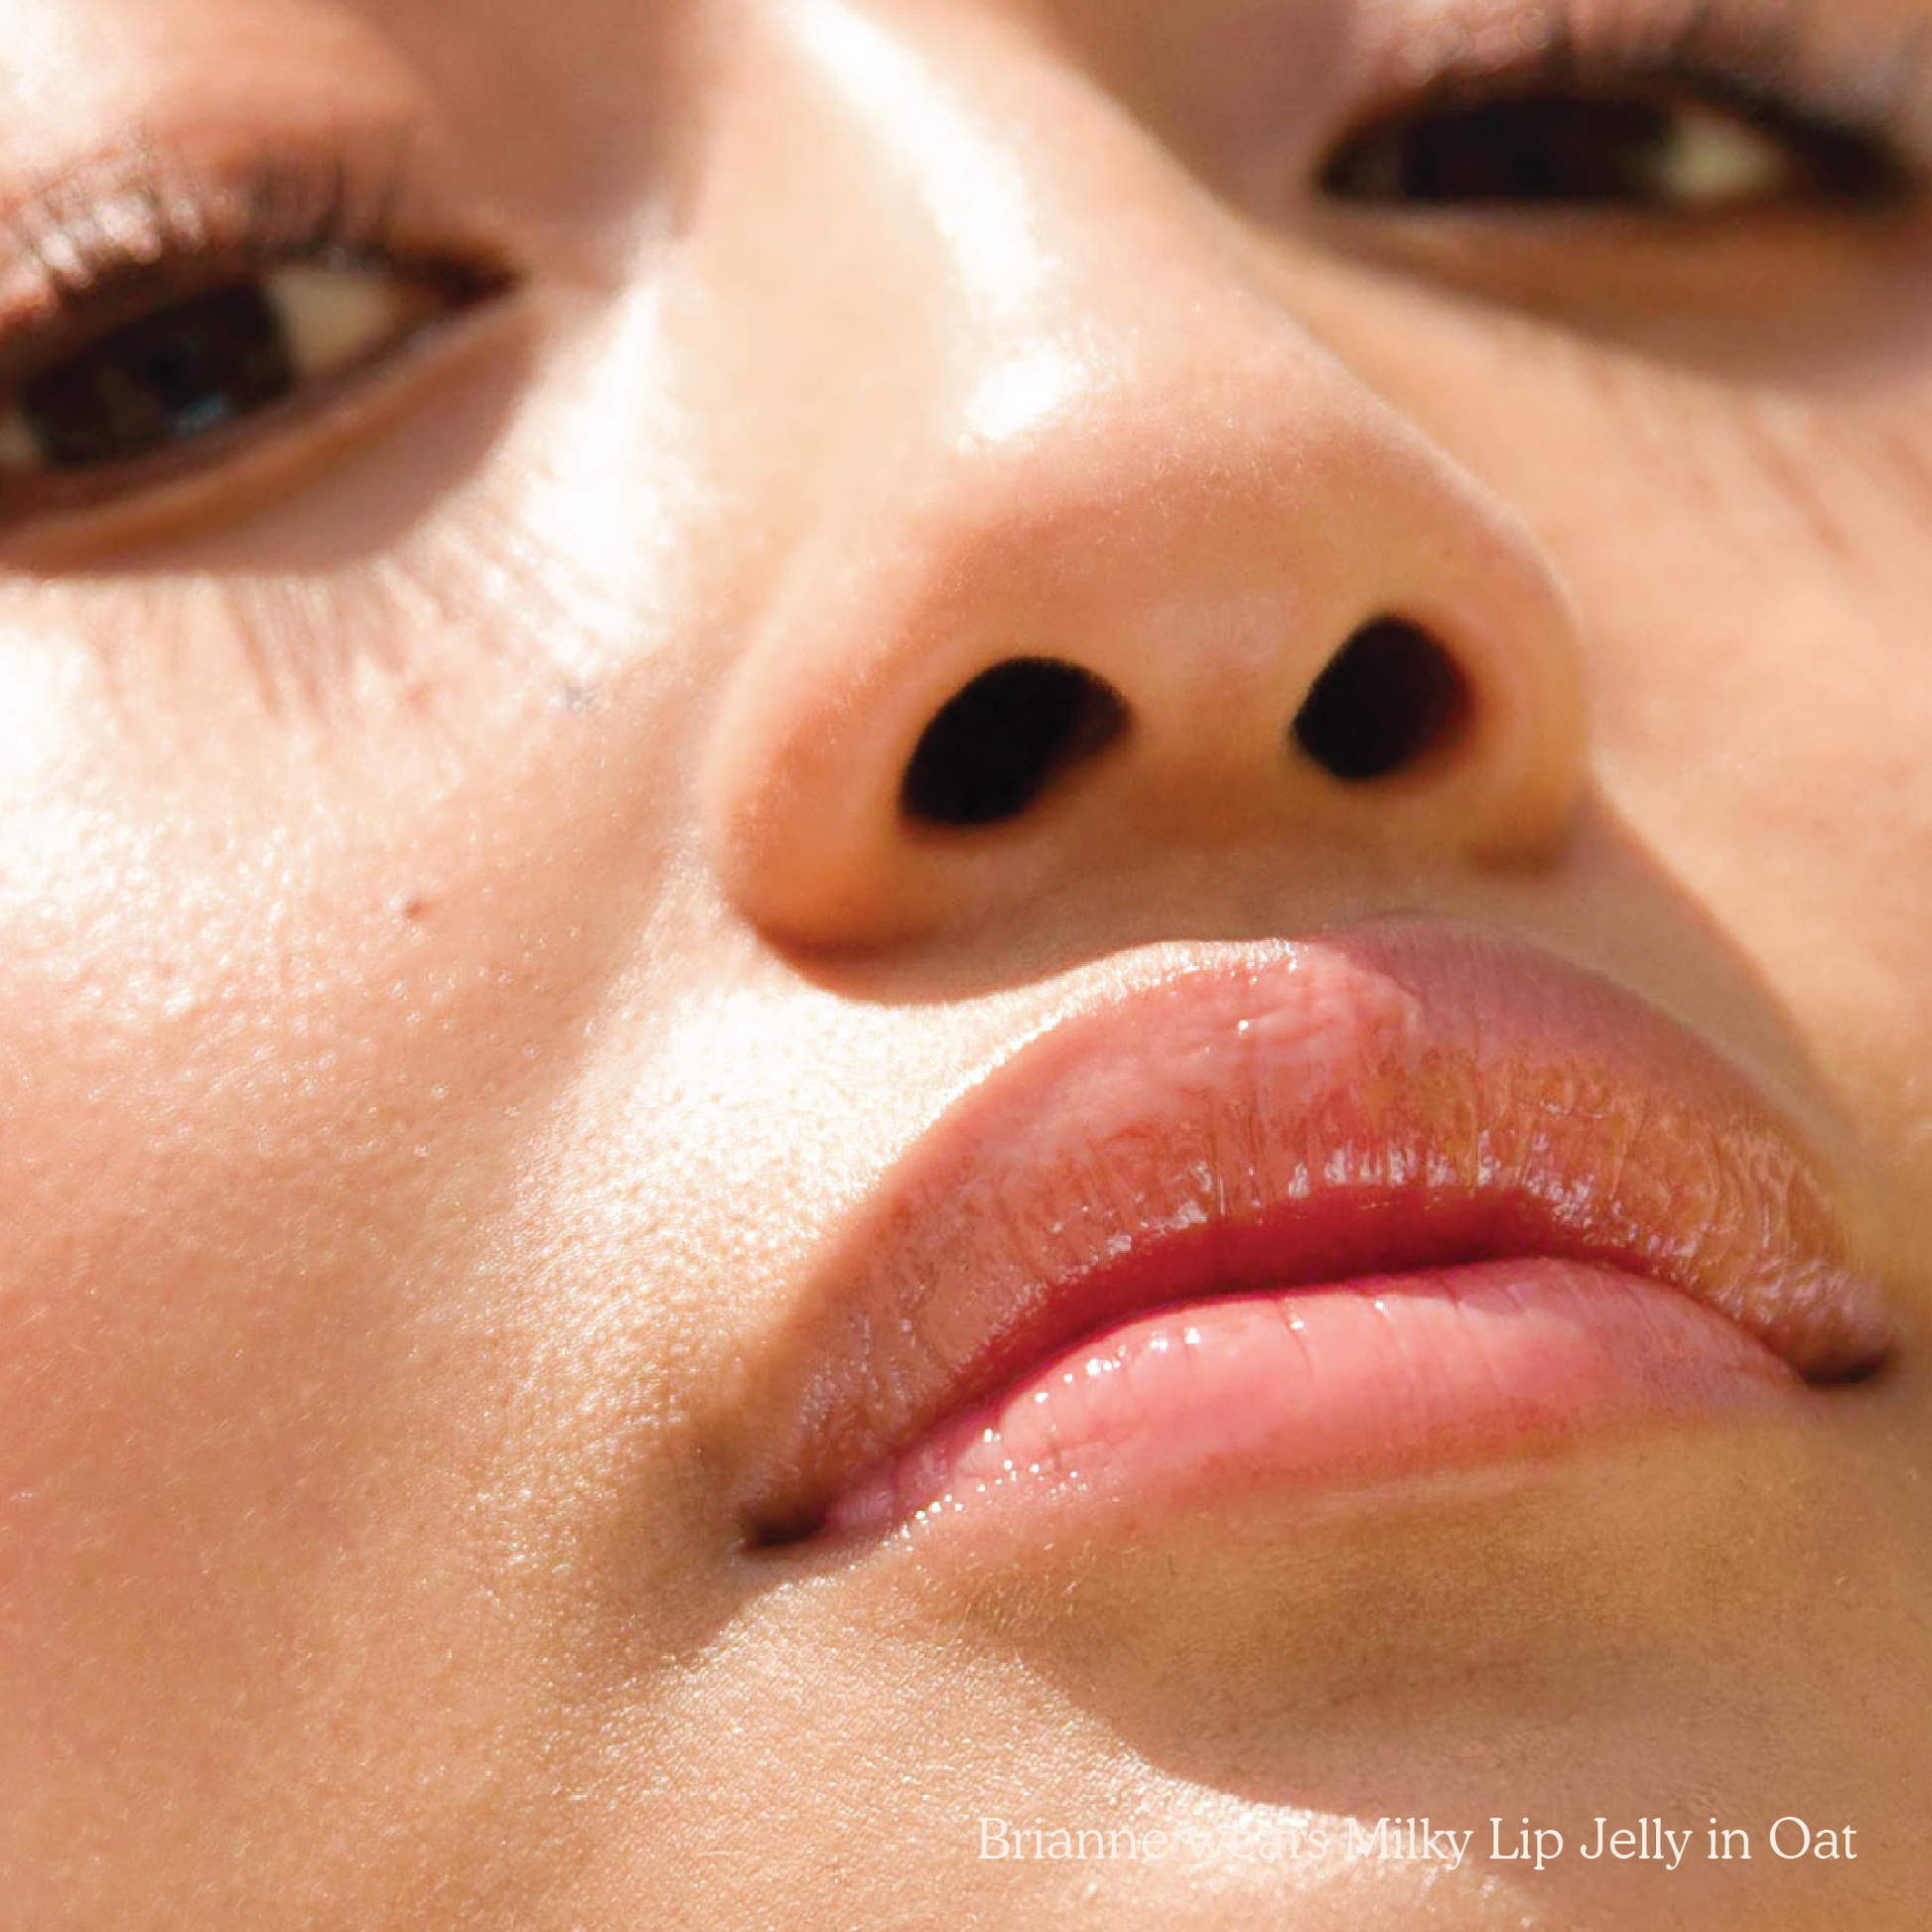 [Shared: Closeup photo of a girl with very glossy lips, wearing the Tower 28 Beauty ShineOn Milky Lip Jelly shade in Oat (a milky peachy-pink)